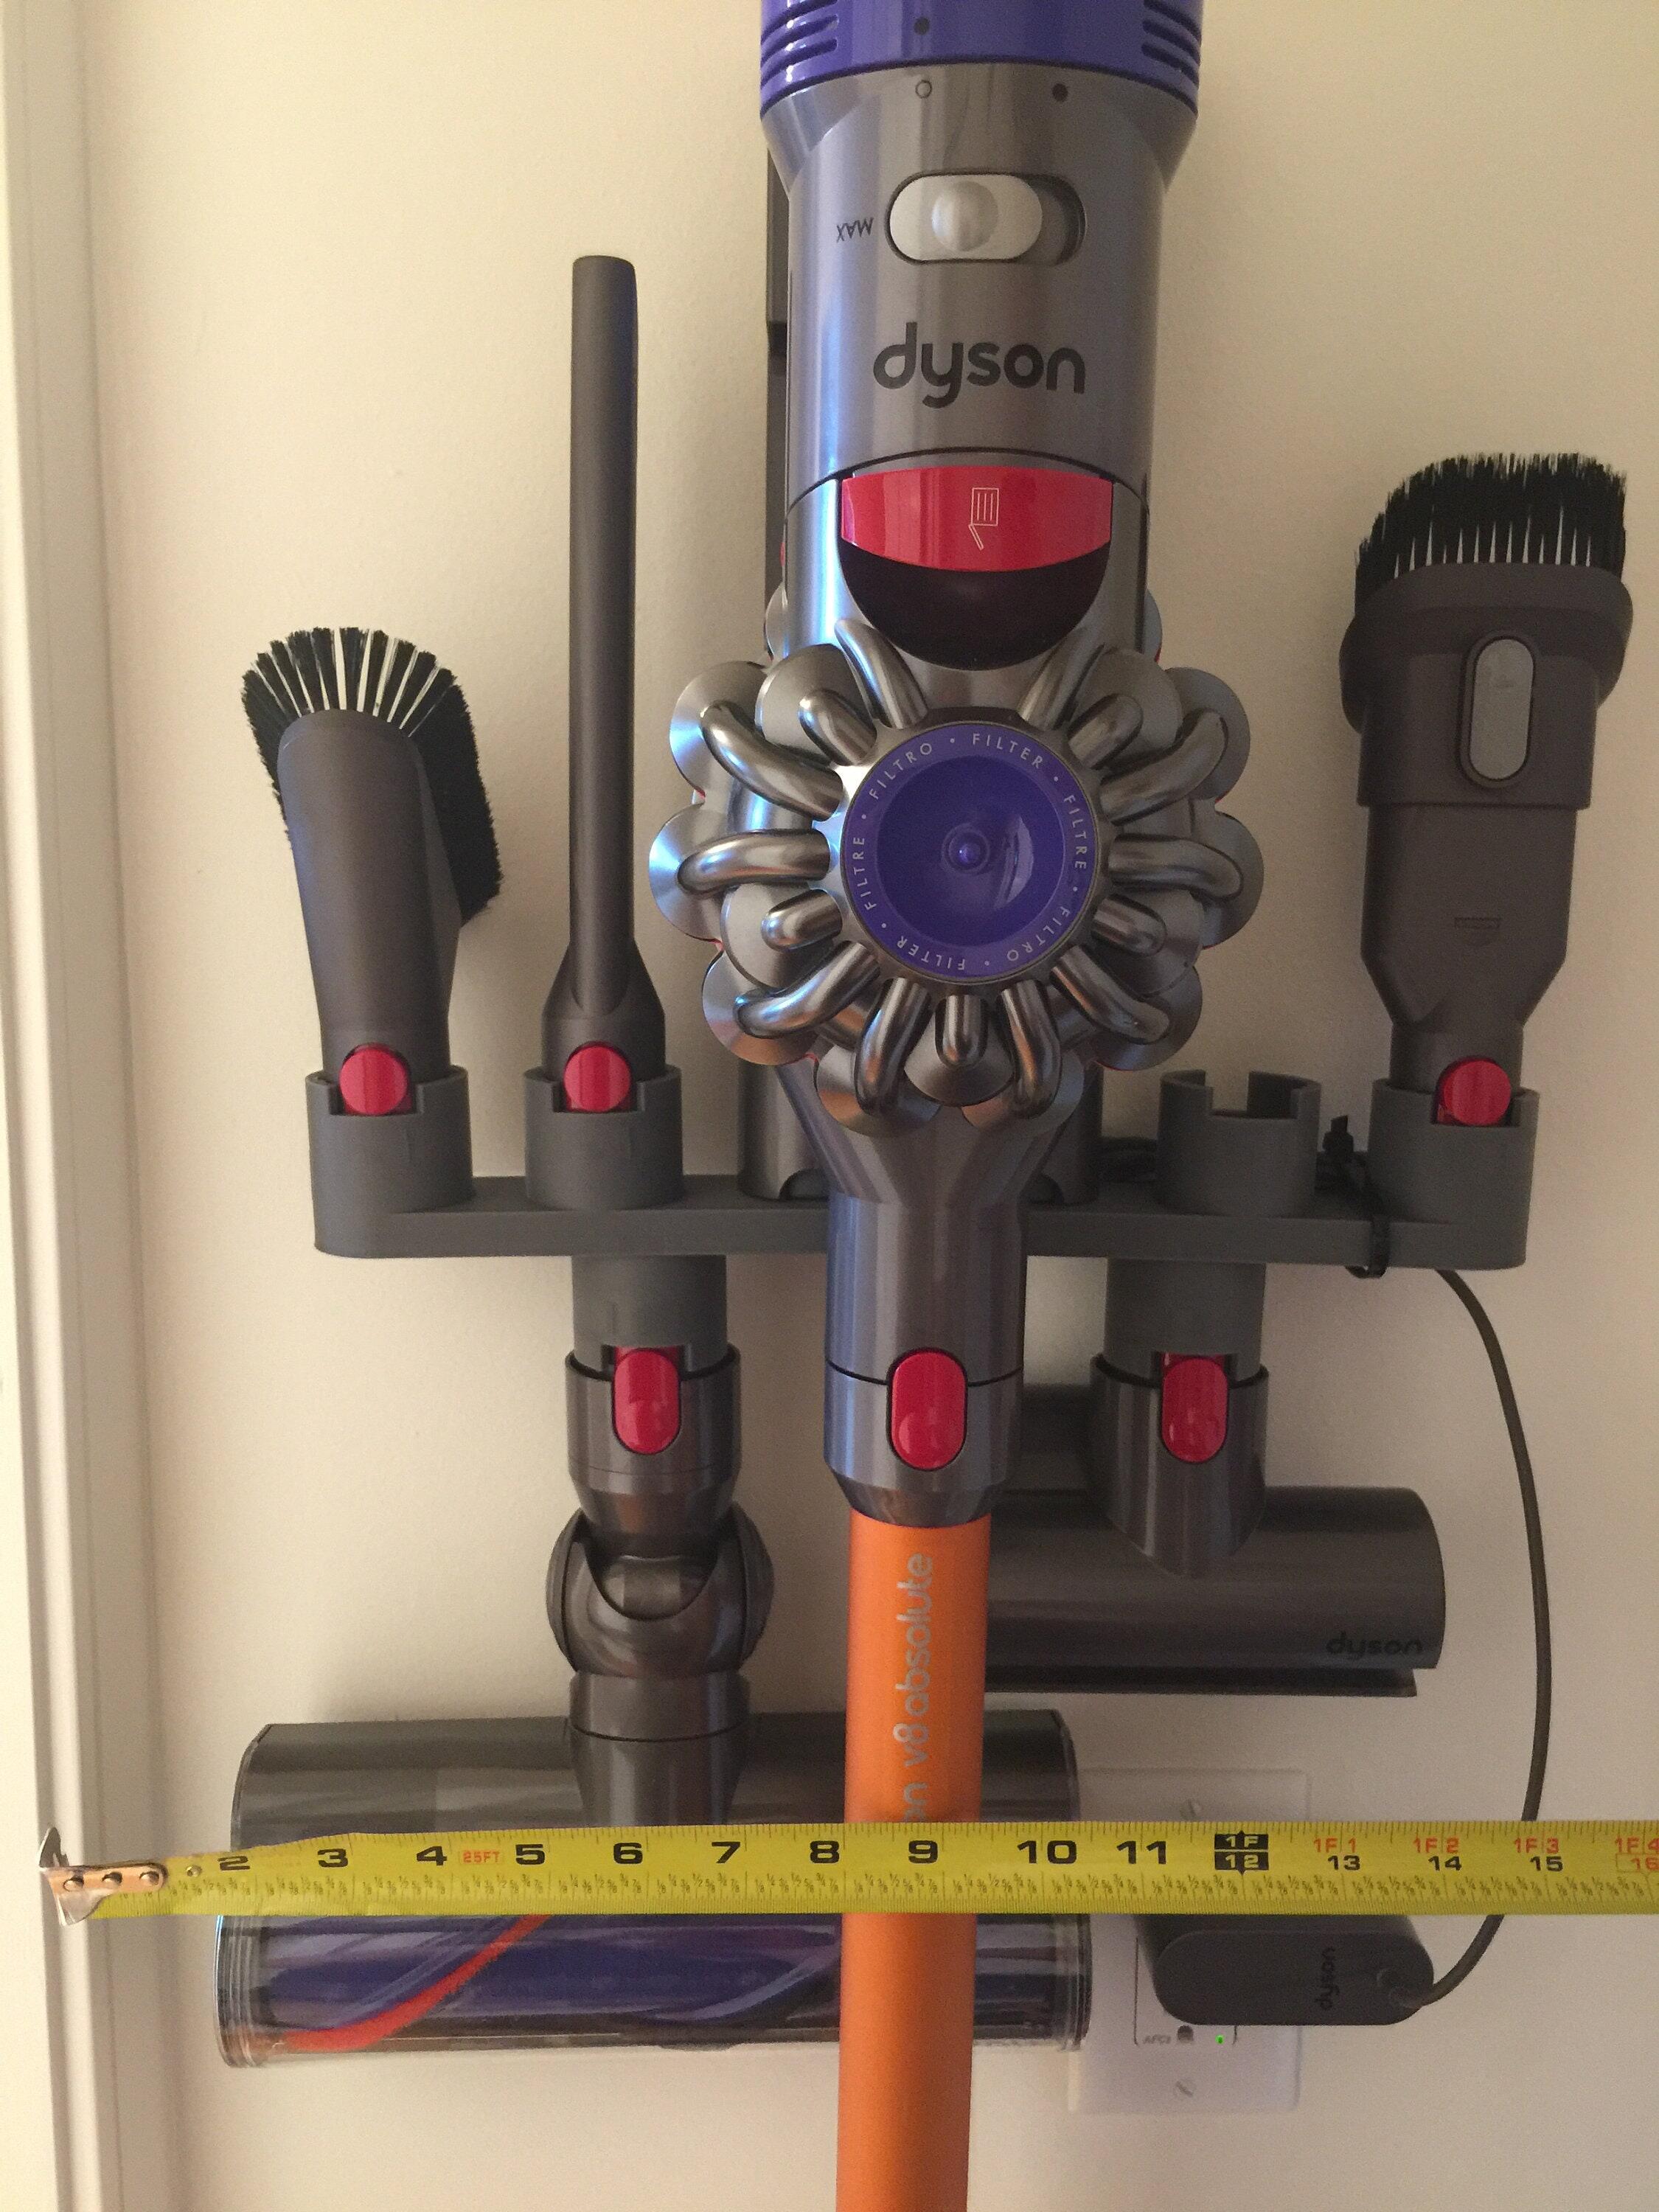 EXCLUSIVE REDESIGN Dyson V7 V8 V10 V11 V15 Accessory Holders for 6  Accessories / No Other Seller Has This Version Not Even  -  Canada